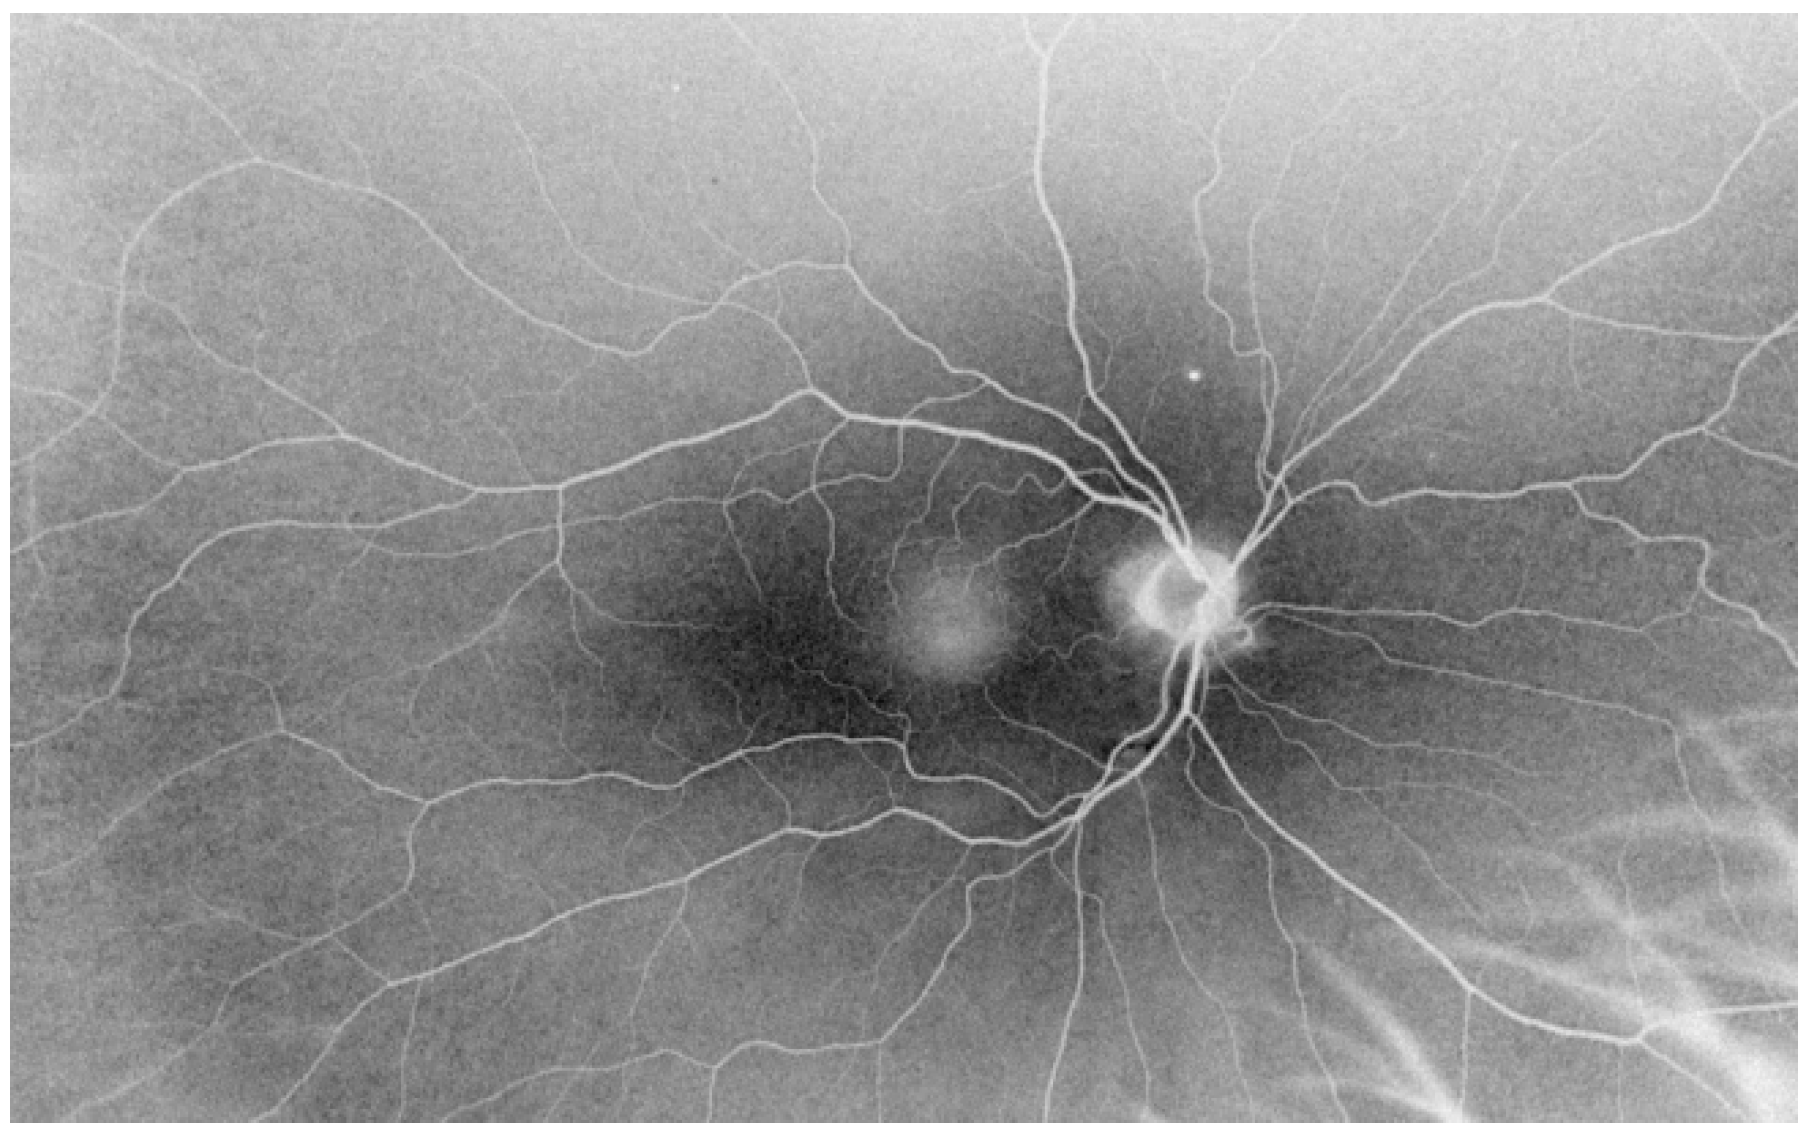 Ultra-wide fundus photograph (UWFP) and optical coherence